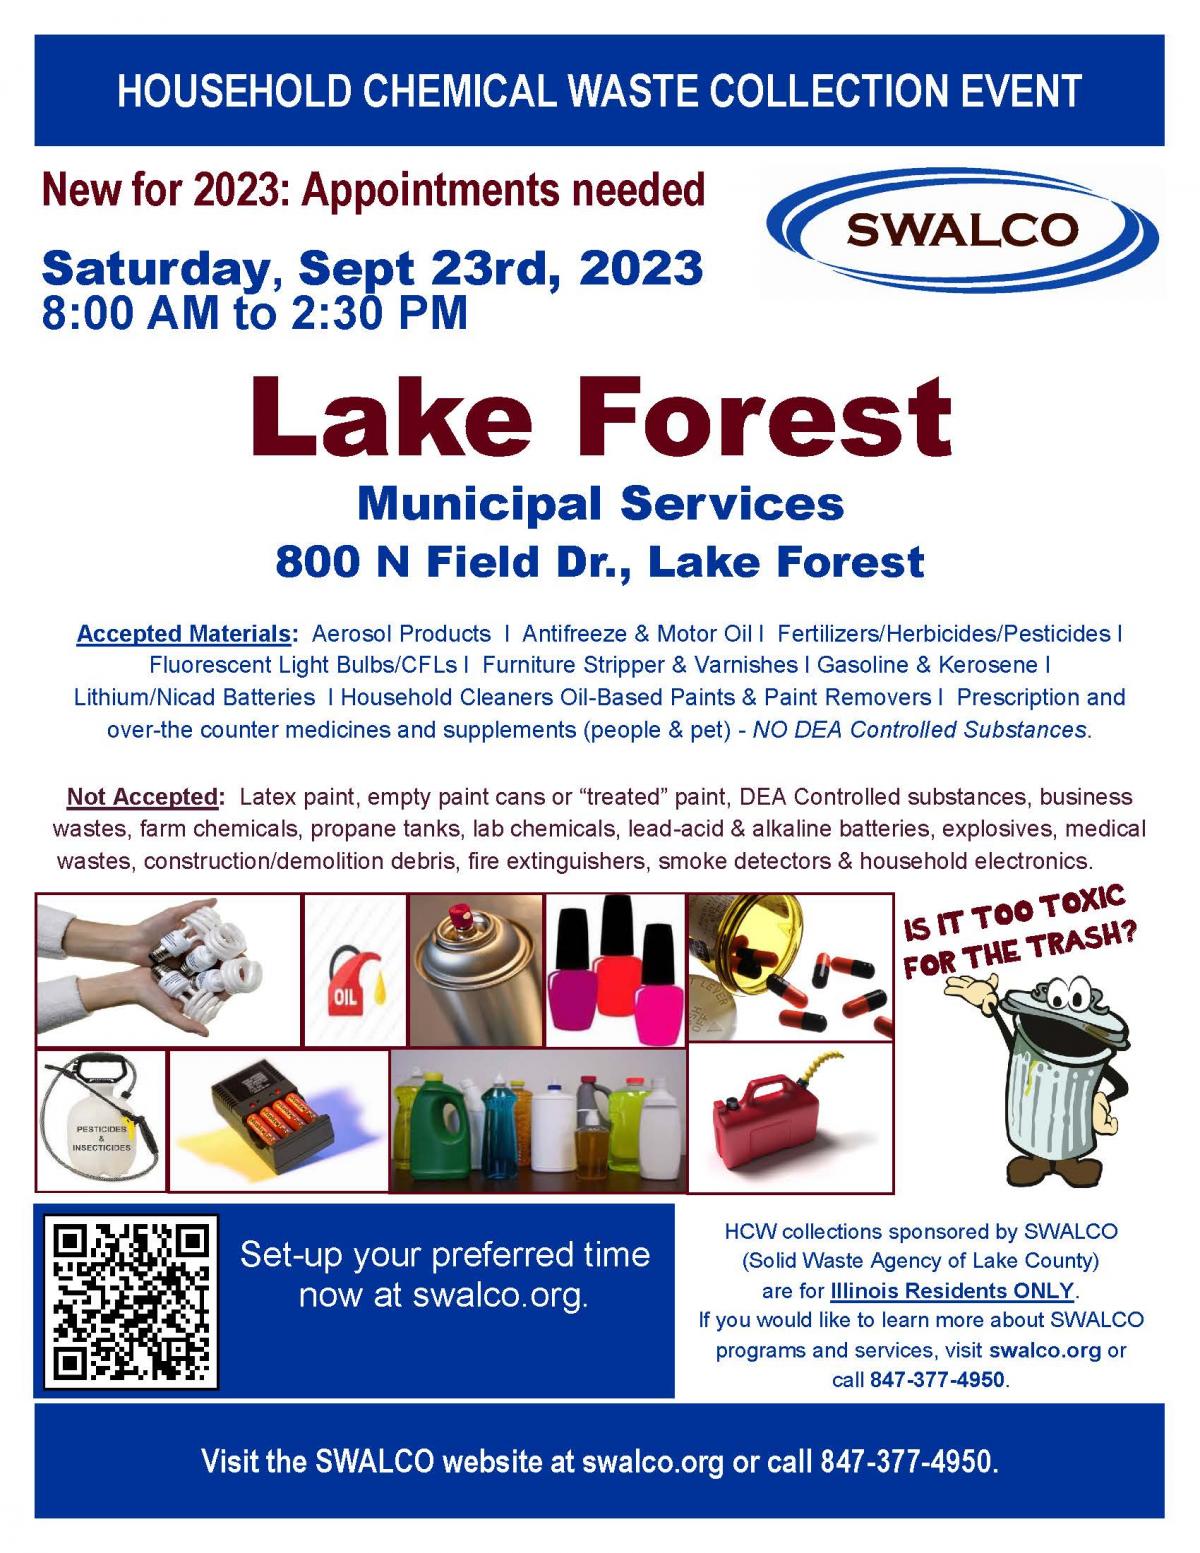 SWALCO 2023 Mobile Household Chemical Waste Collection Event